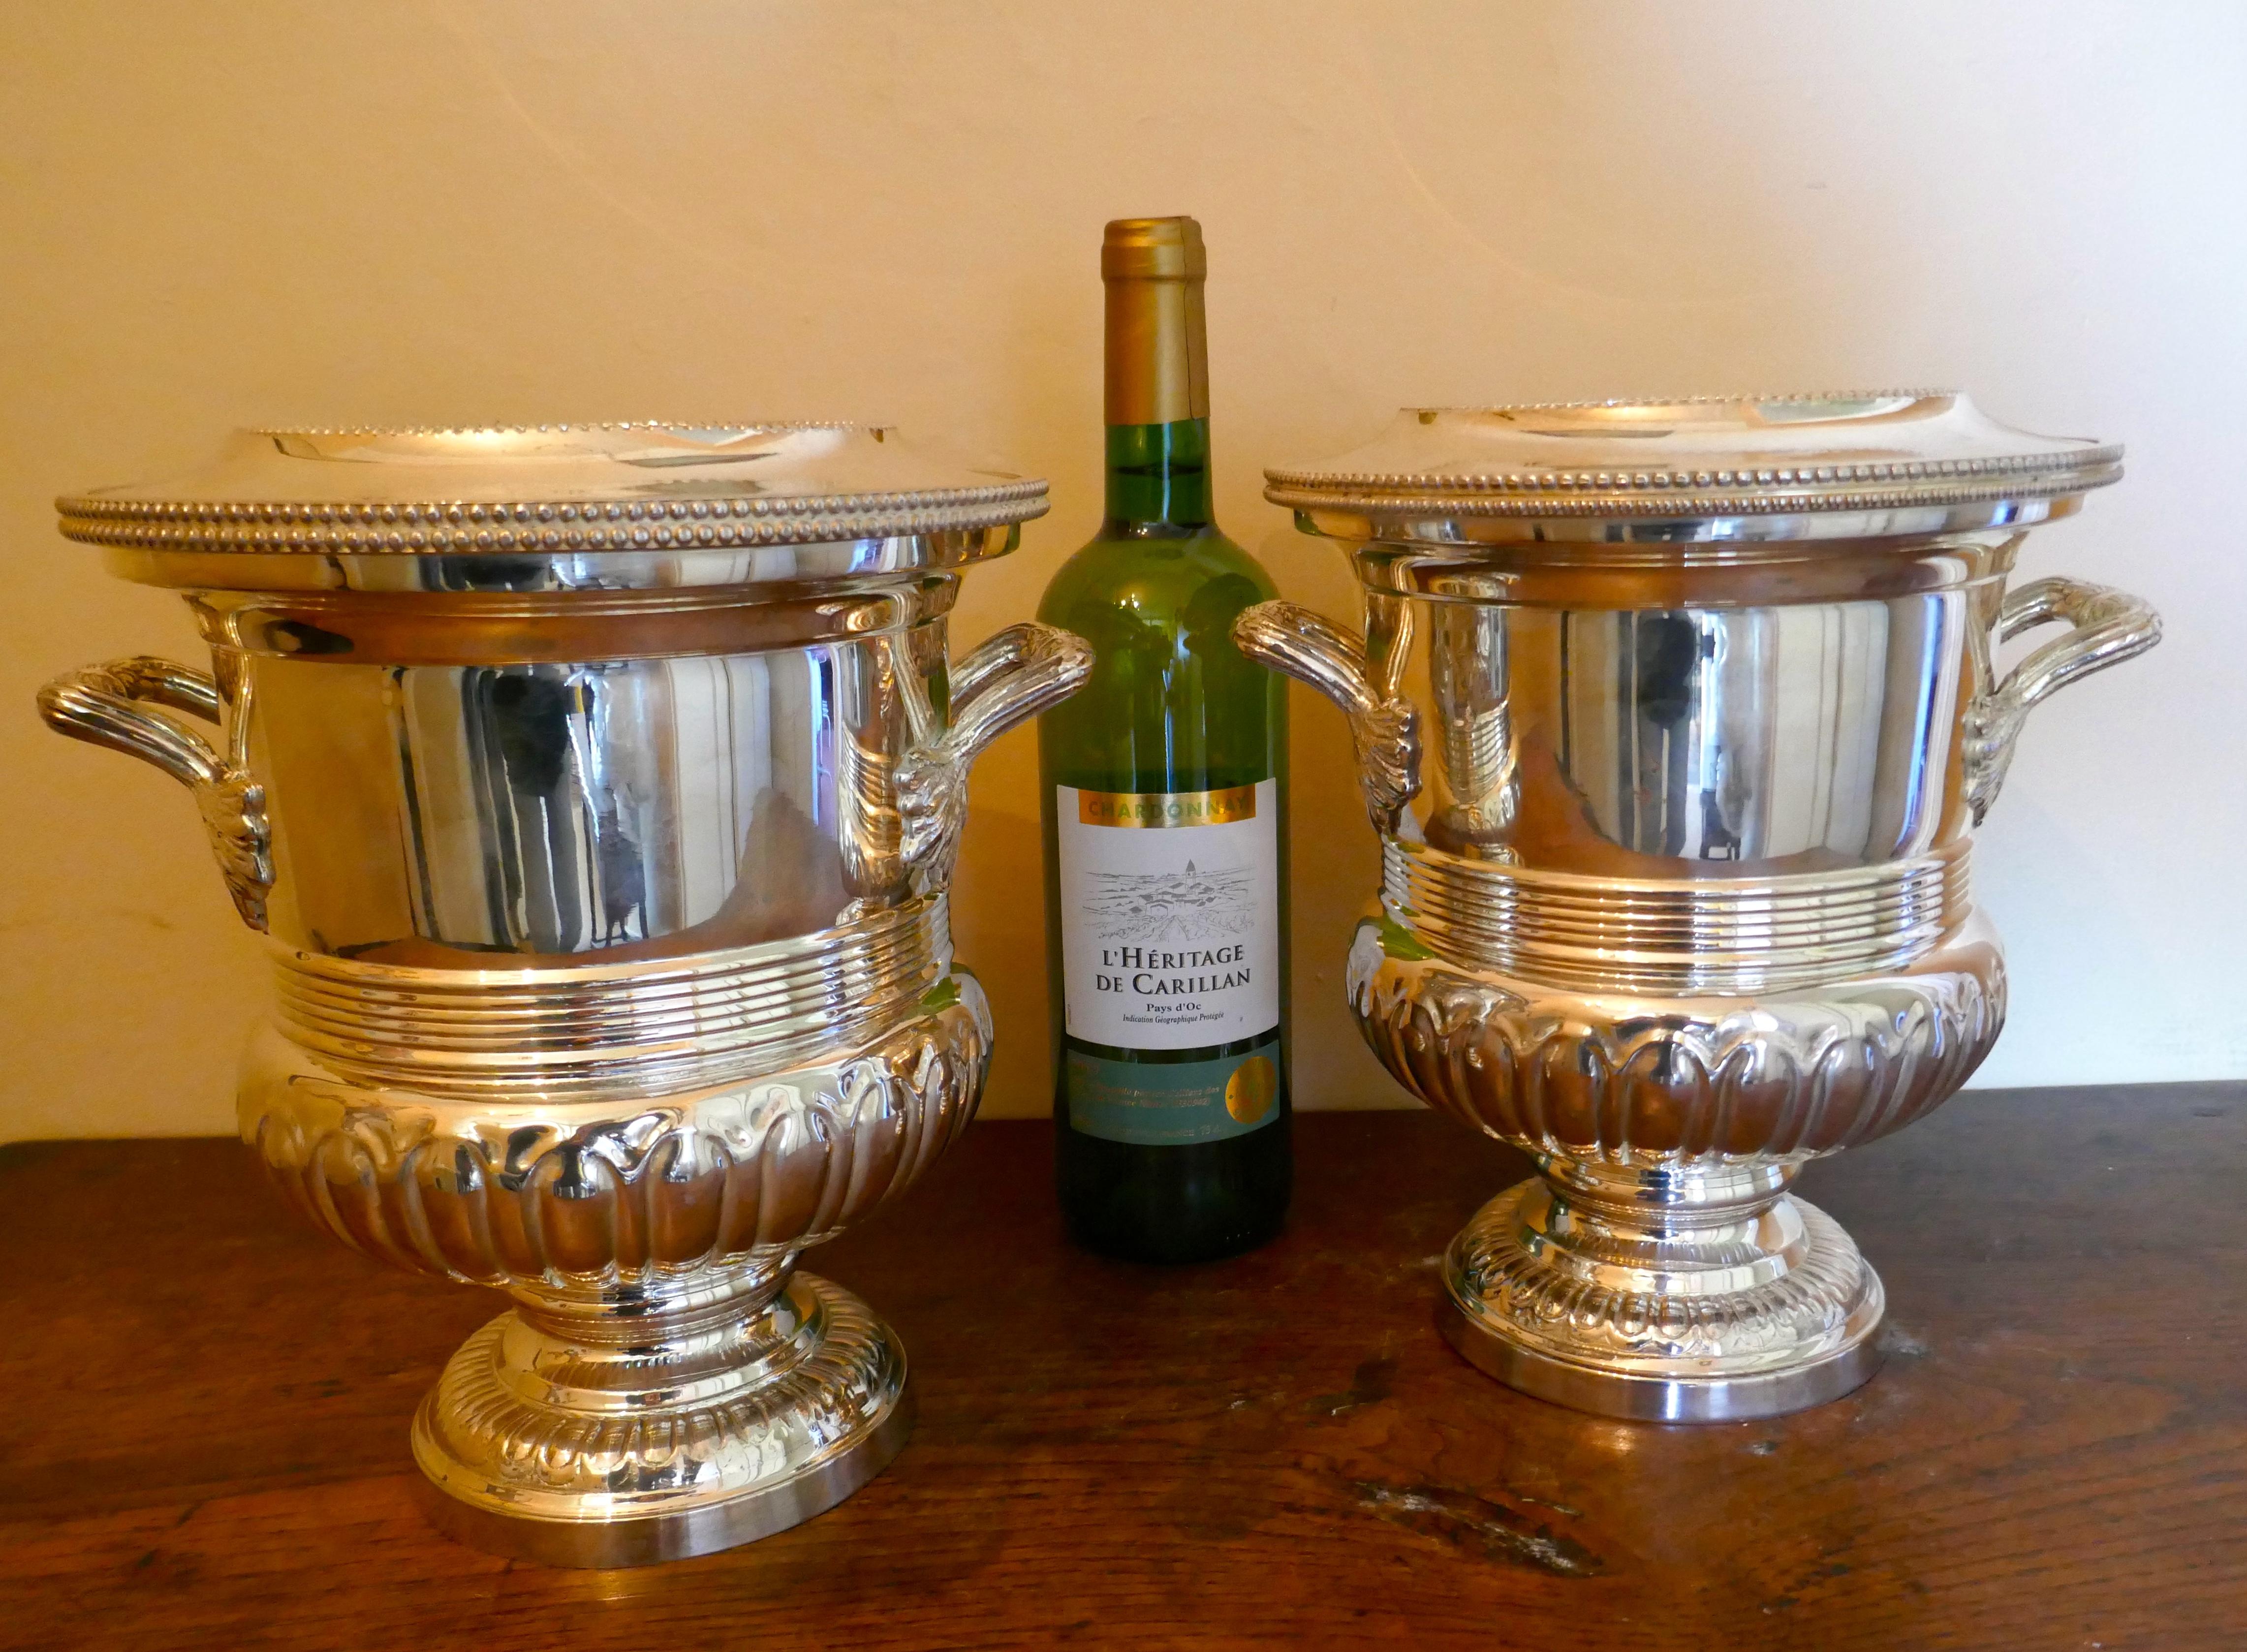 A fine pair of Campana style wine coolers, champagne ice buckets

A very attractive pair of vintage ice buckets complete with removable interior liners
The wine coolers are in heavy quality silver plate and have not seen much use, they are such